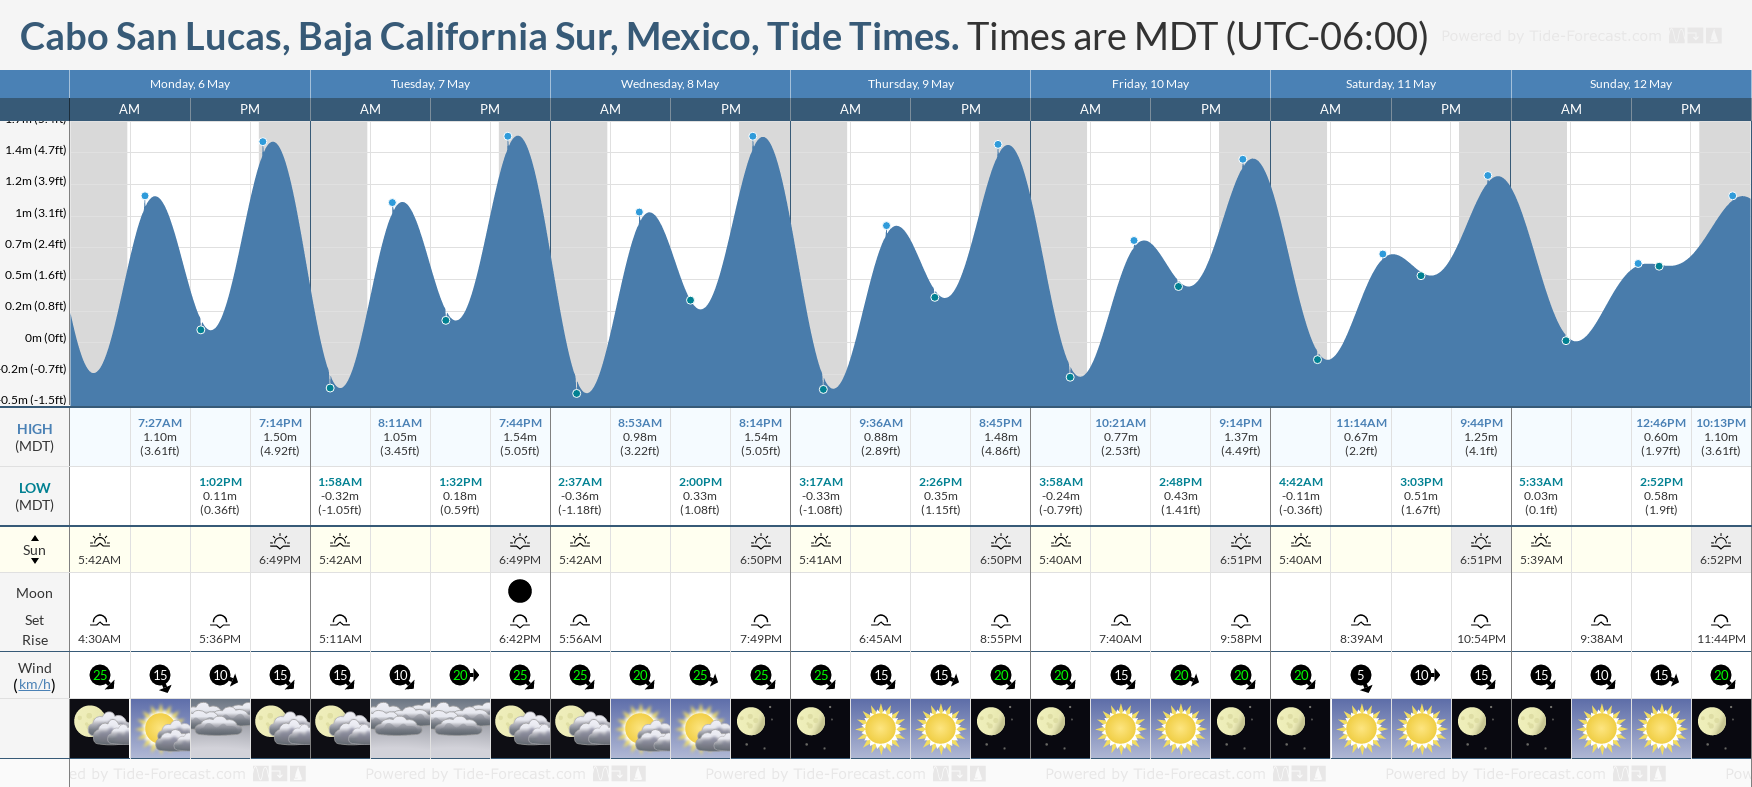 Cabo San Lucas, Baja California Sur, Mexico Tide Chart including high and low tide tide times for the next 7 days